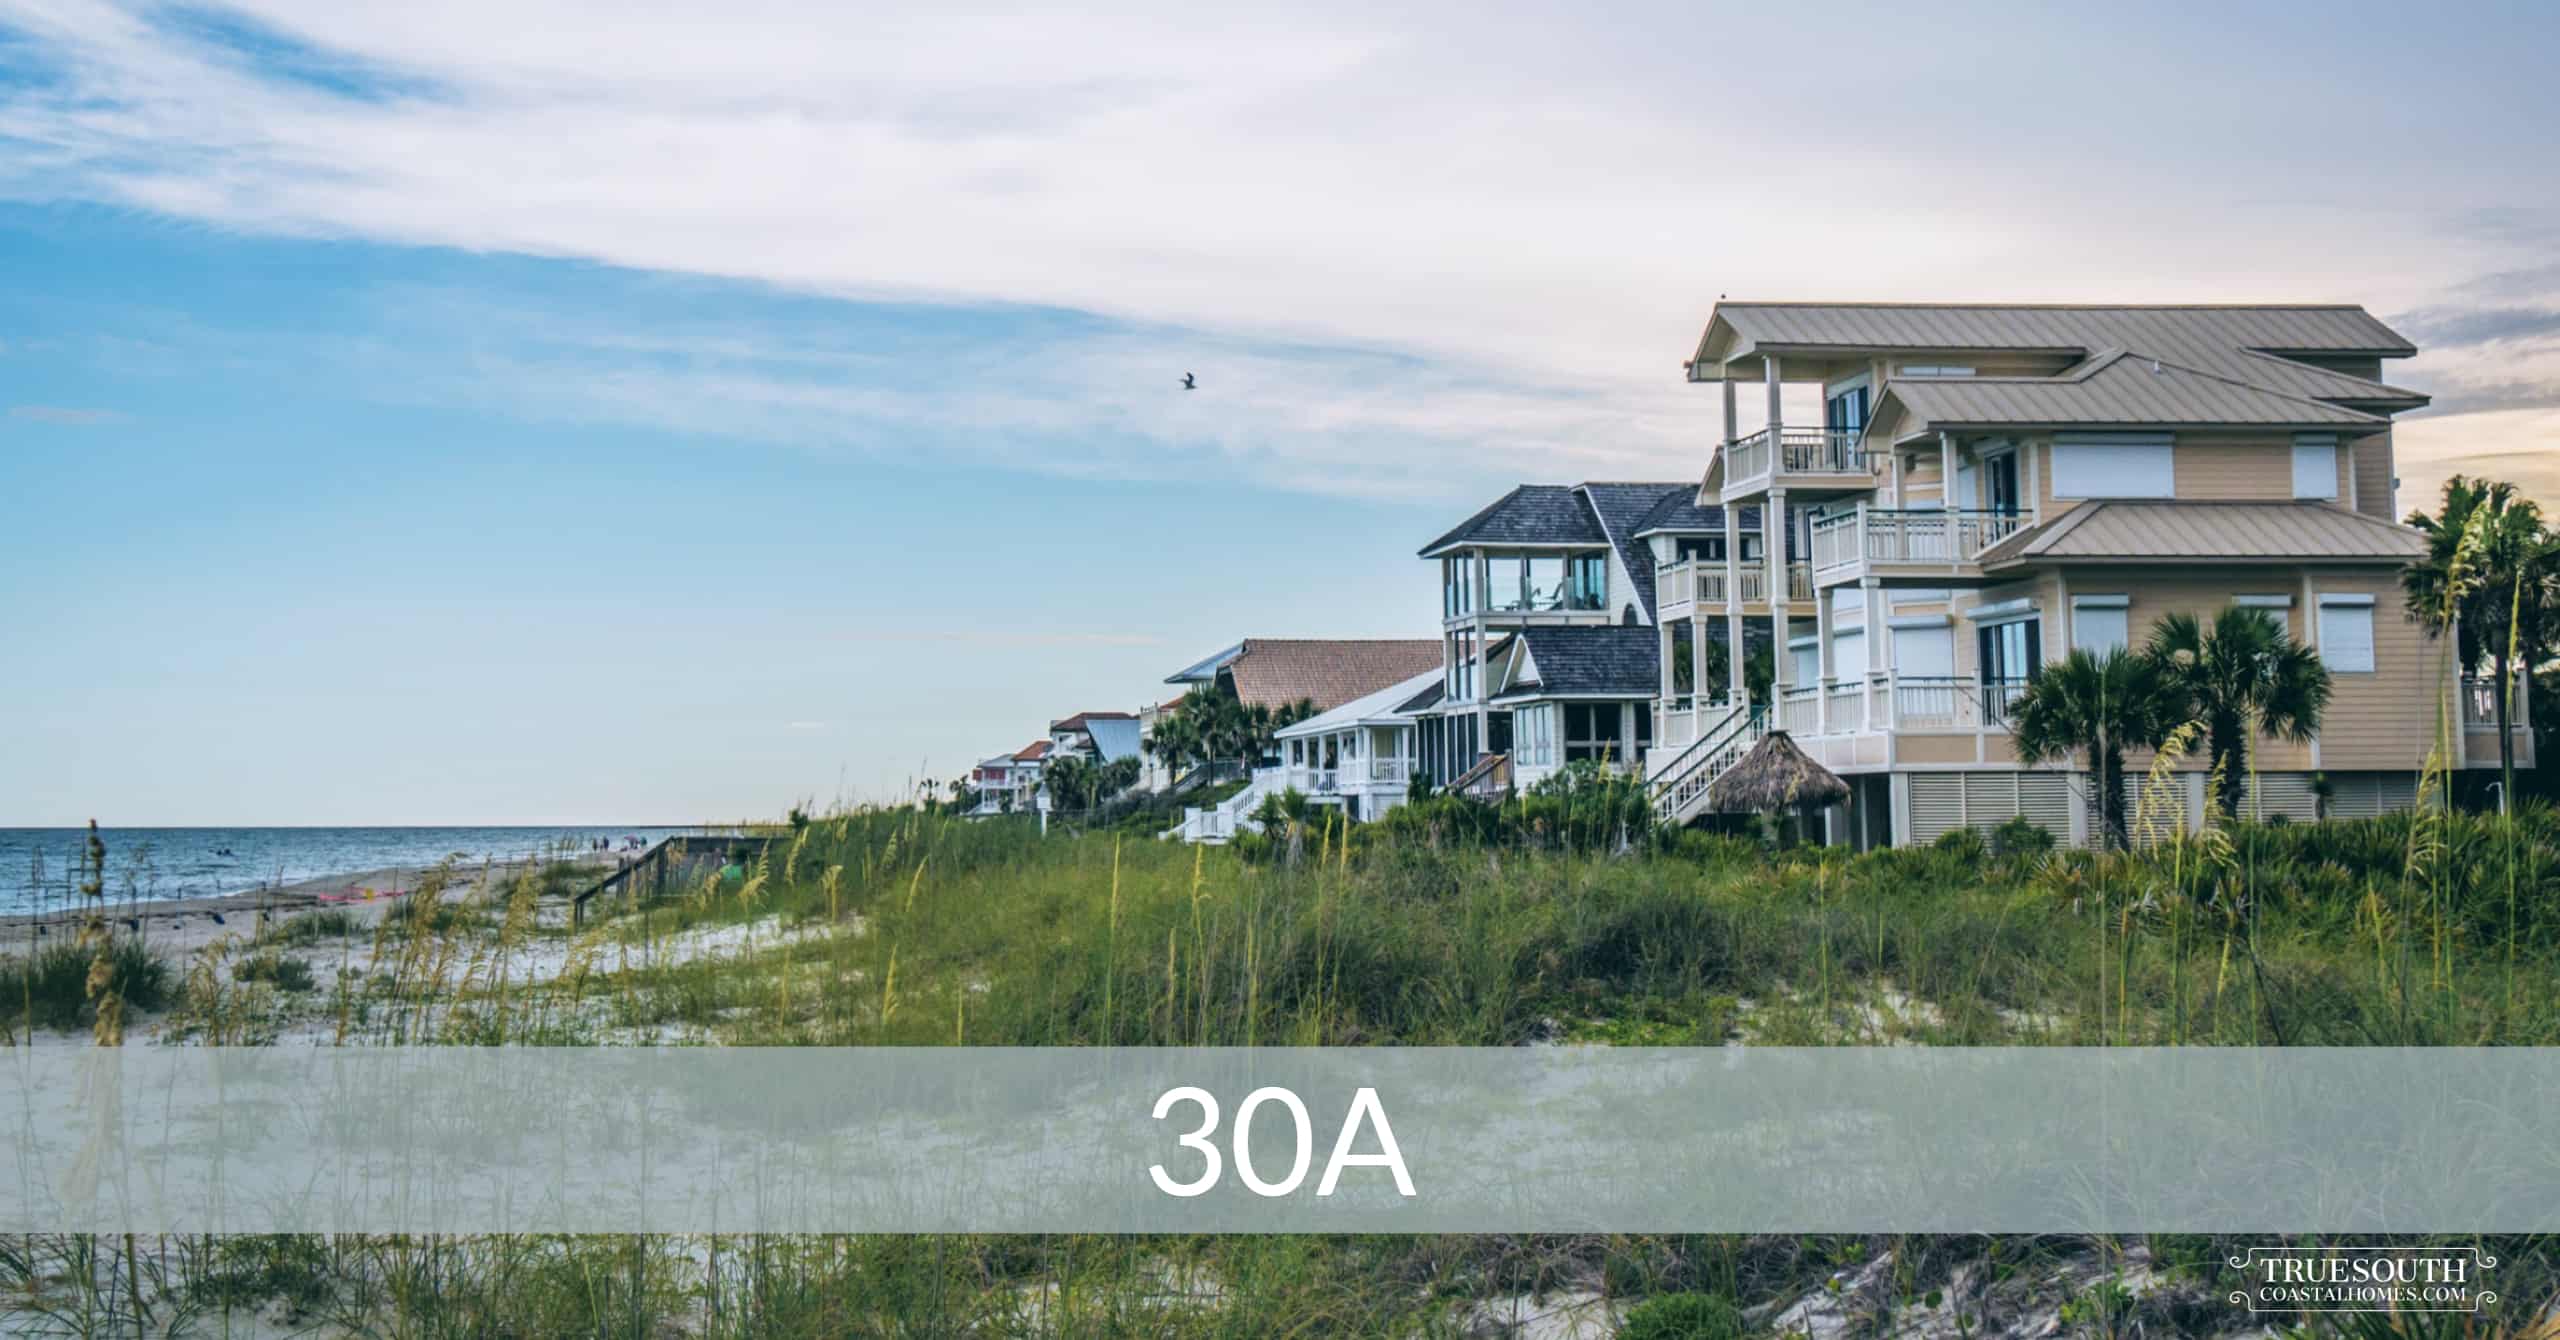 30A Beach Homes with Dunes